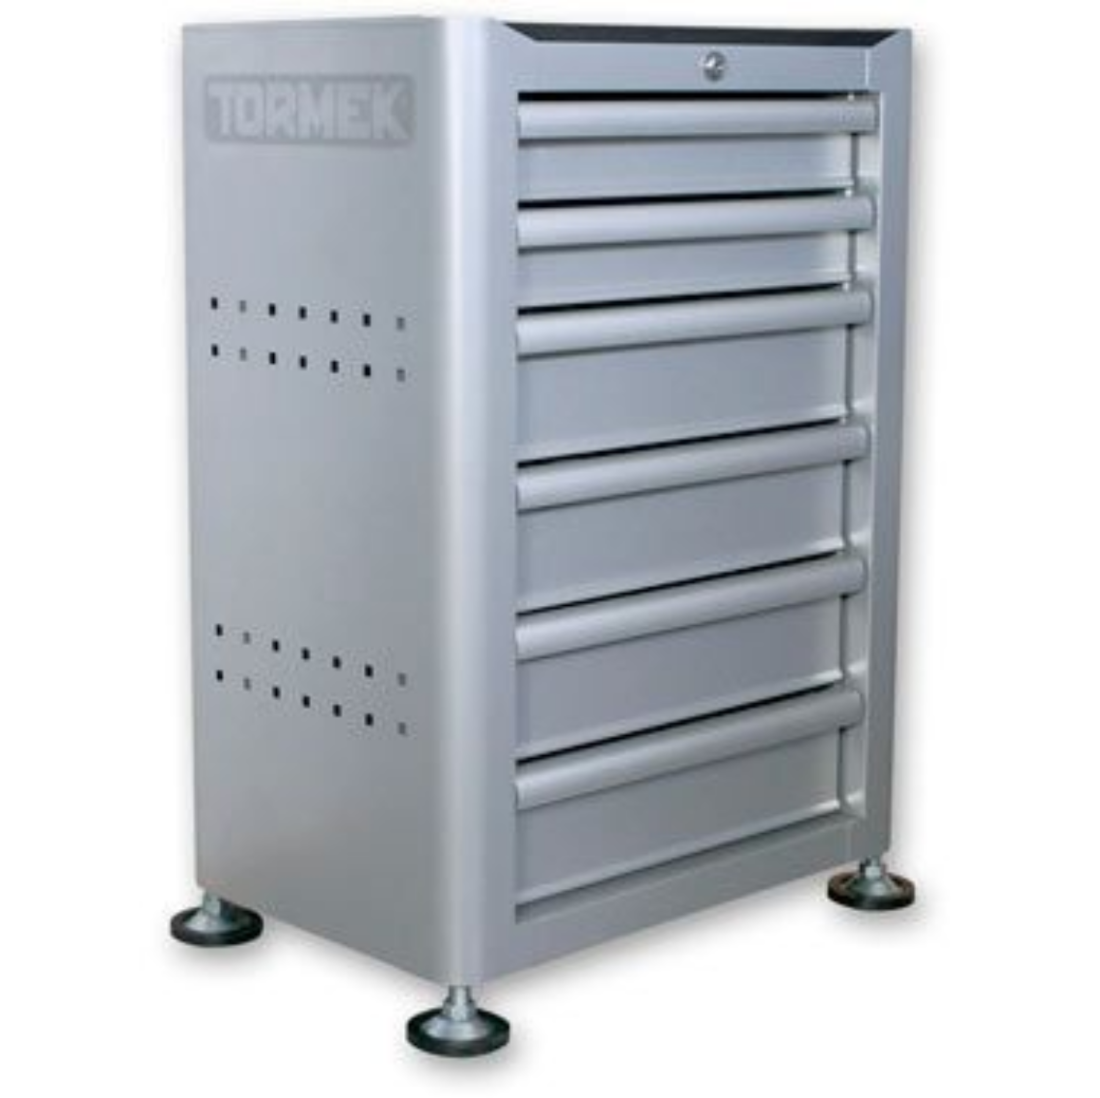 Tormek sharpening station with height adjustable feet. Feet have rubber sleeves.  6 steel drawers with a single lock at the top. The top is slightly recessed to accommodate the rubber mat.